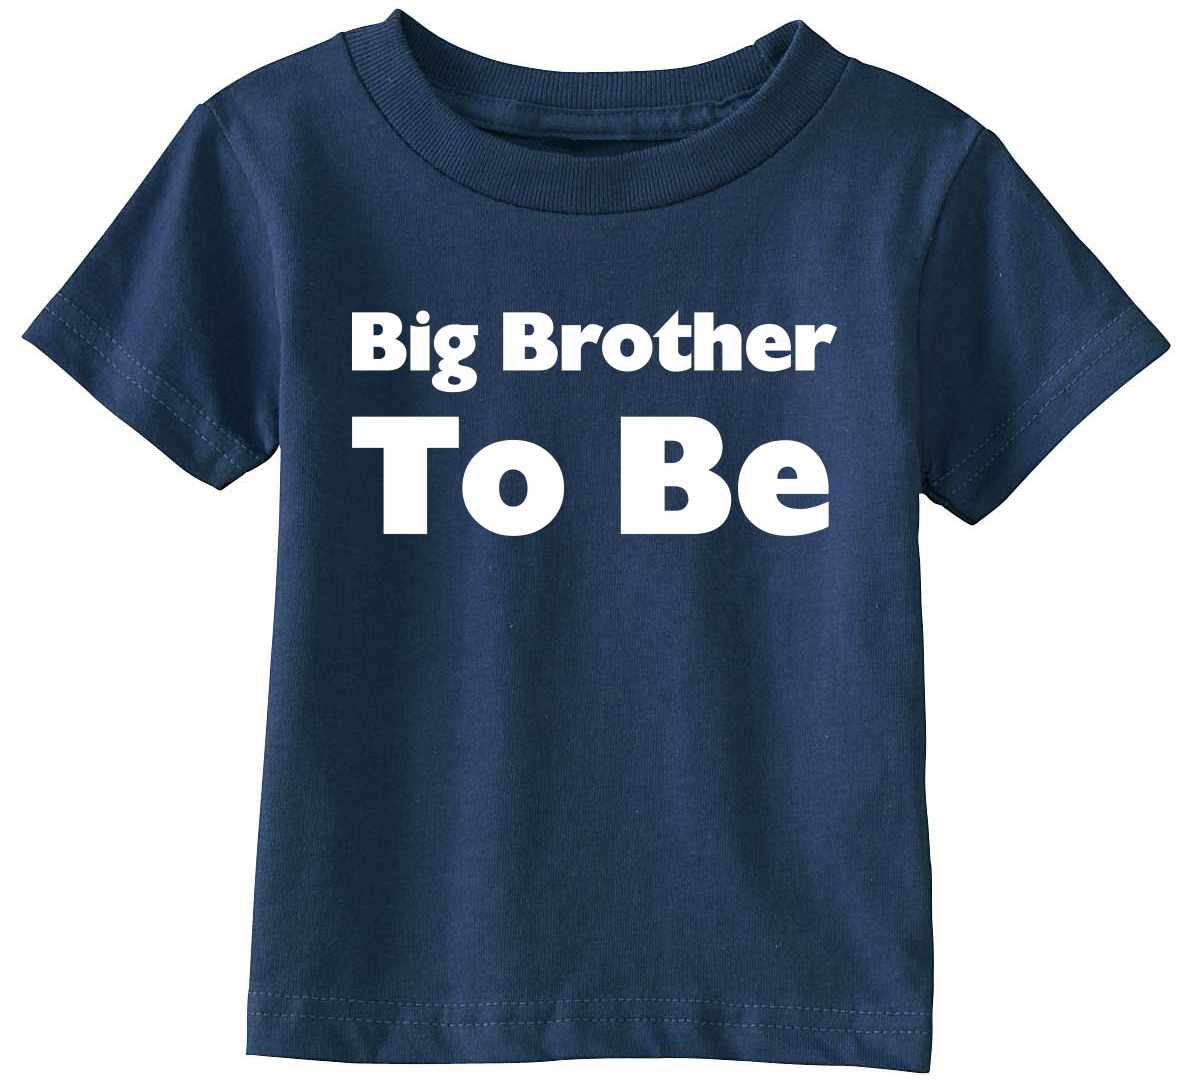 Big Brother To Be Infant/Toddler  (#863-7)